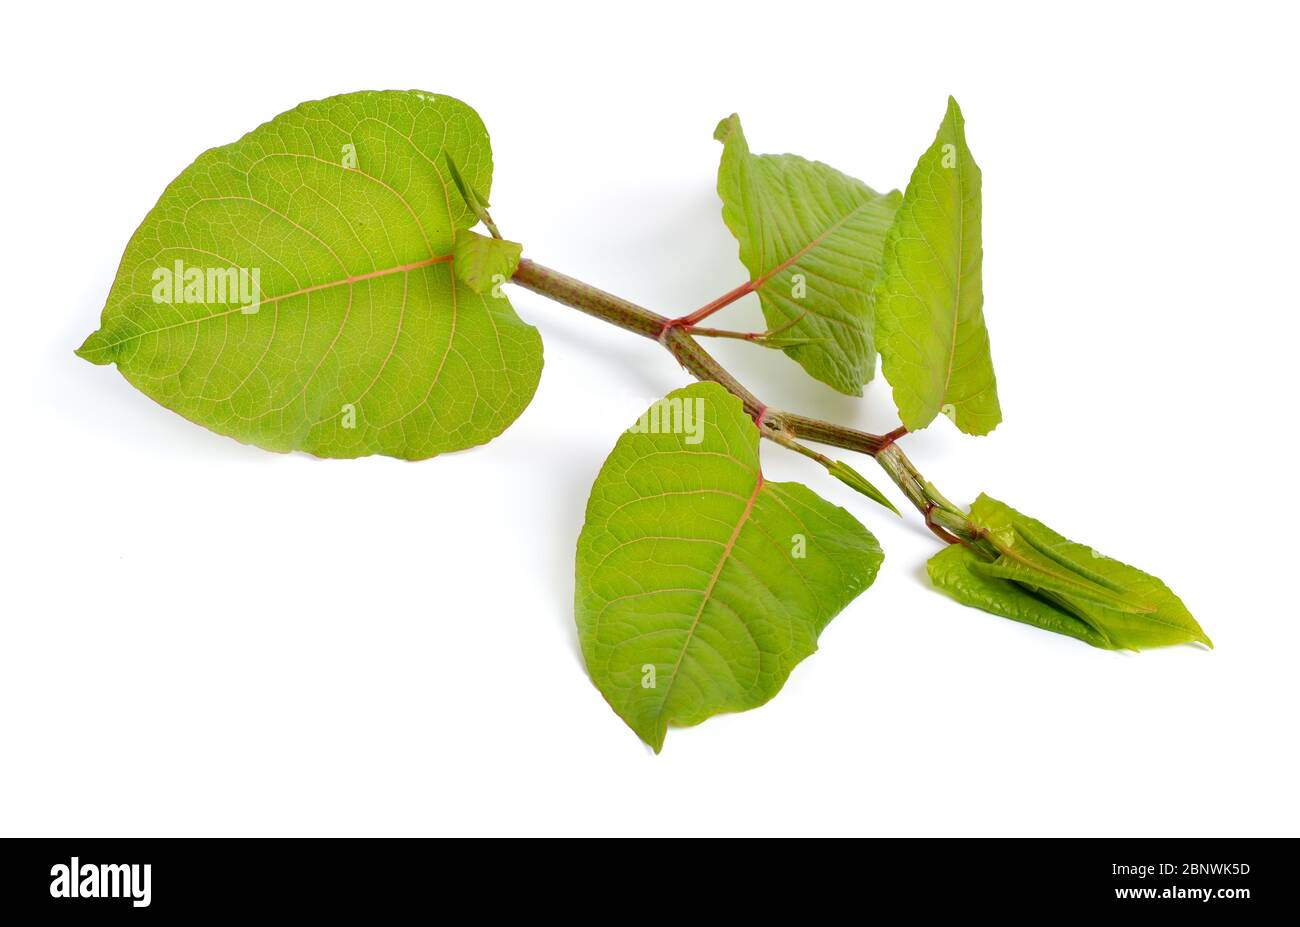 Reynutriya Bohemian or japonica, sachalinensis. Isolated on white. Stock Photo